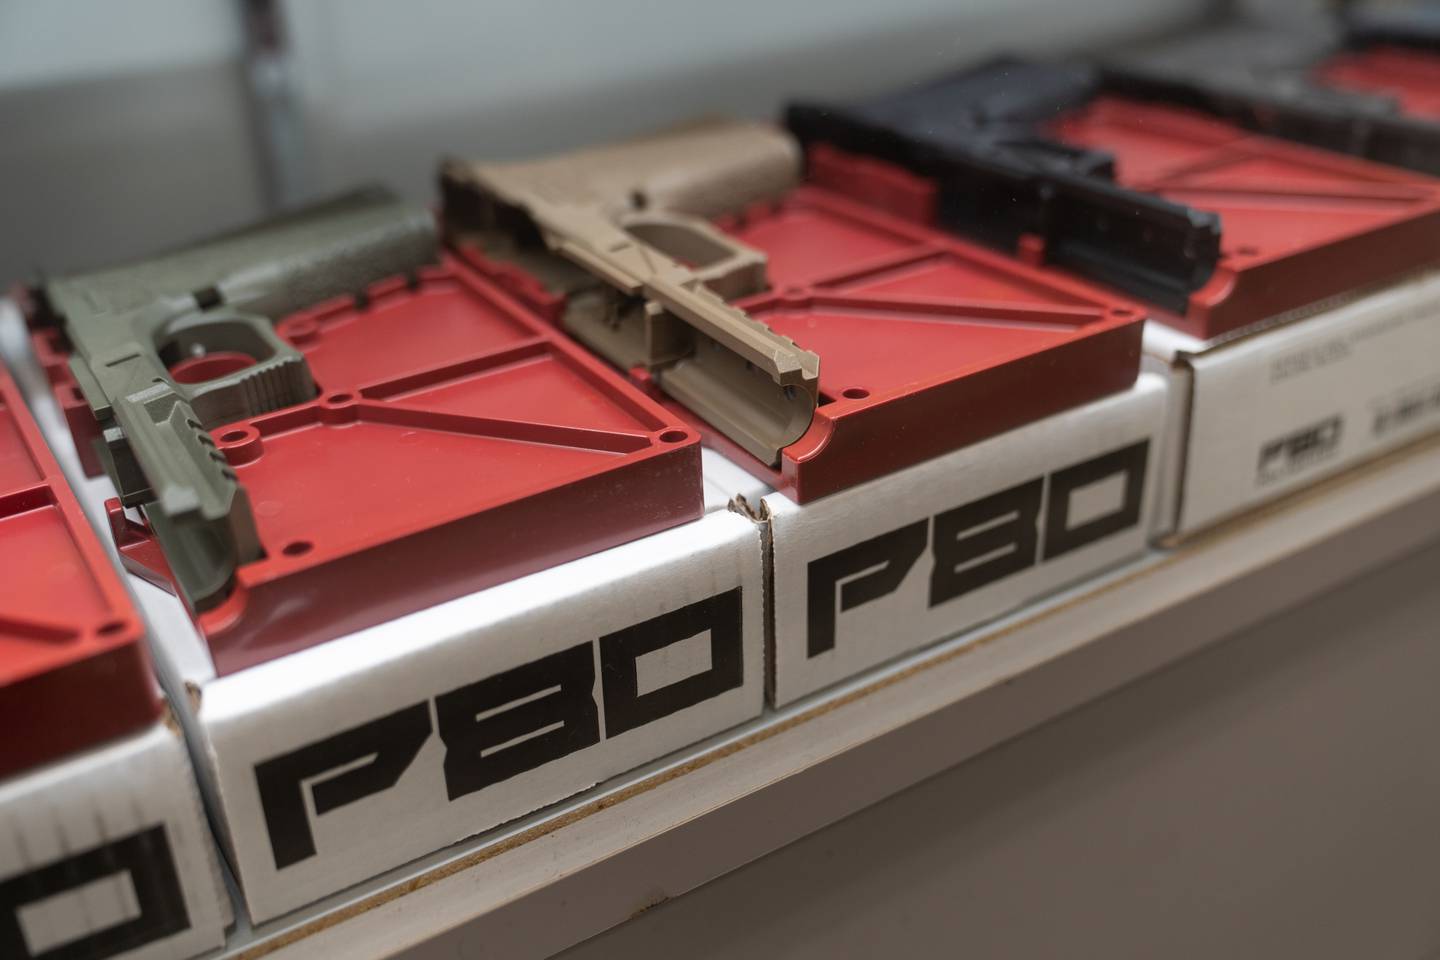 Polymer80 80% frames for Glock Inc. pistols for sale at Hiram's Guns / Firearms Unknown store in El Cajon, California, U.S., on Monday, April 26, 2021.